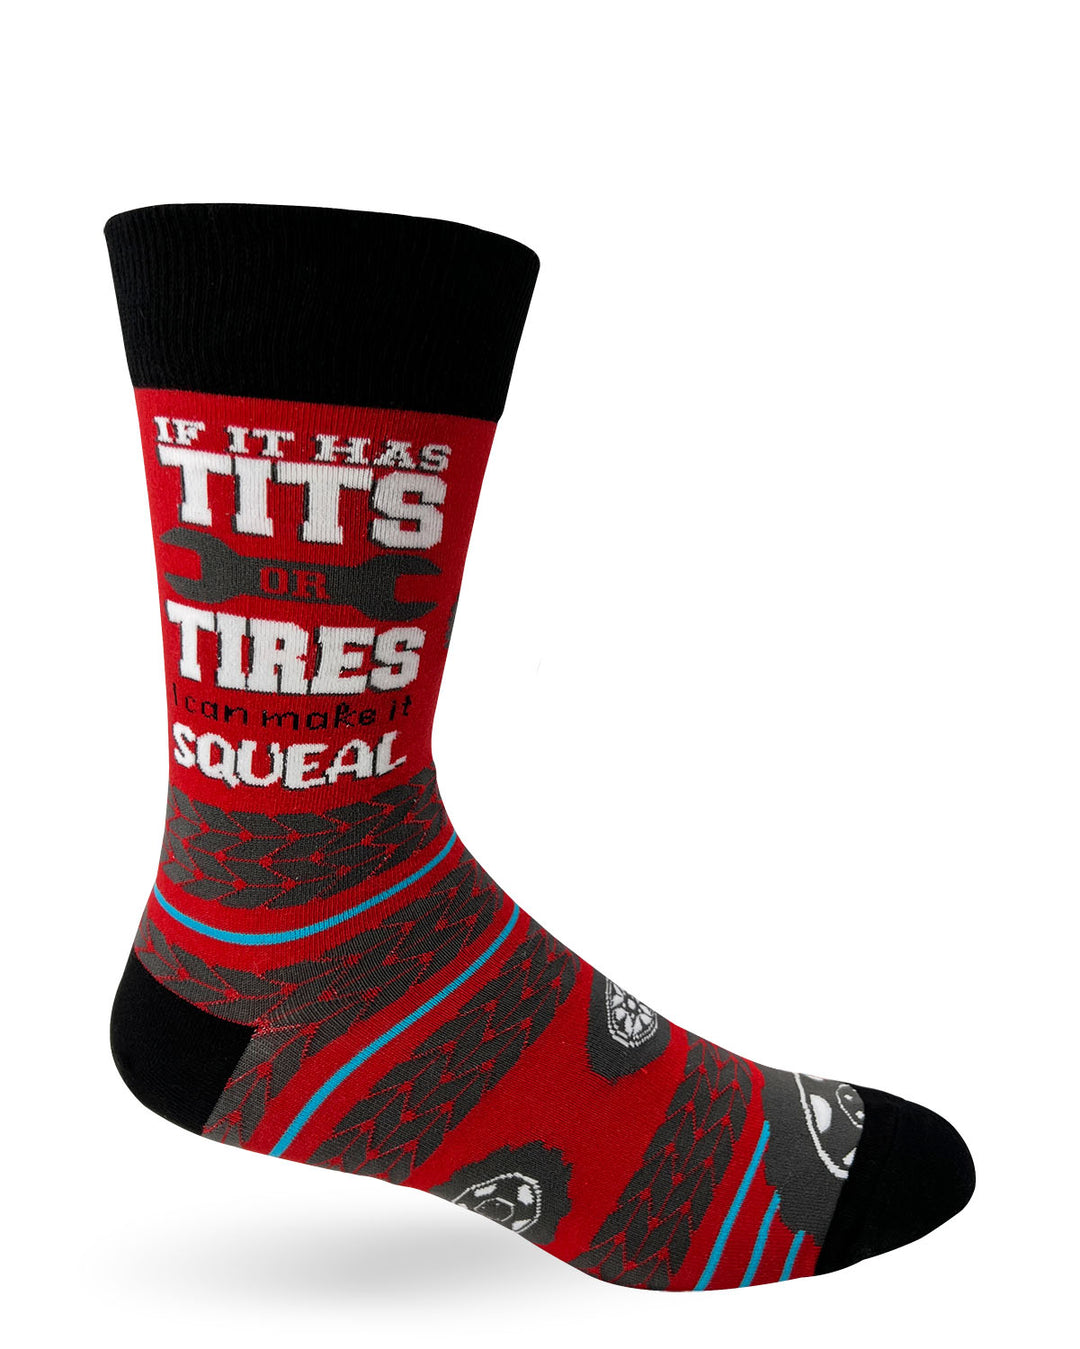 If It Has Tits Or Tires I Can Make It Squeal Men's Novelty Crew Socks